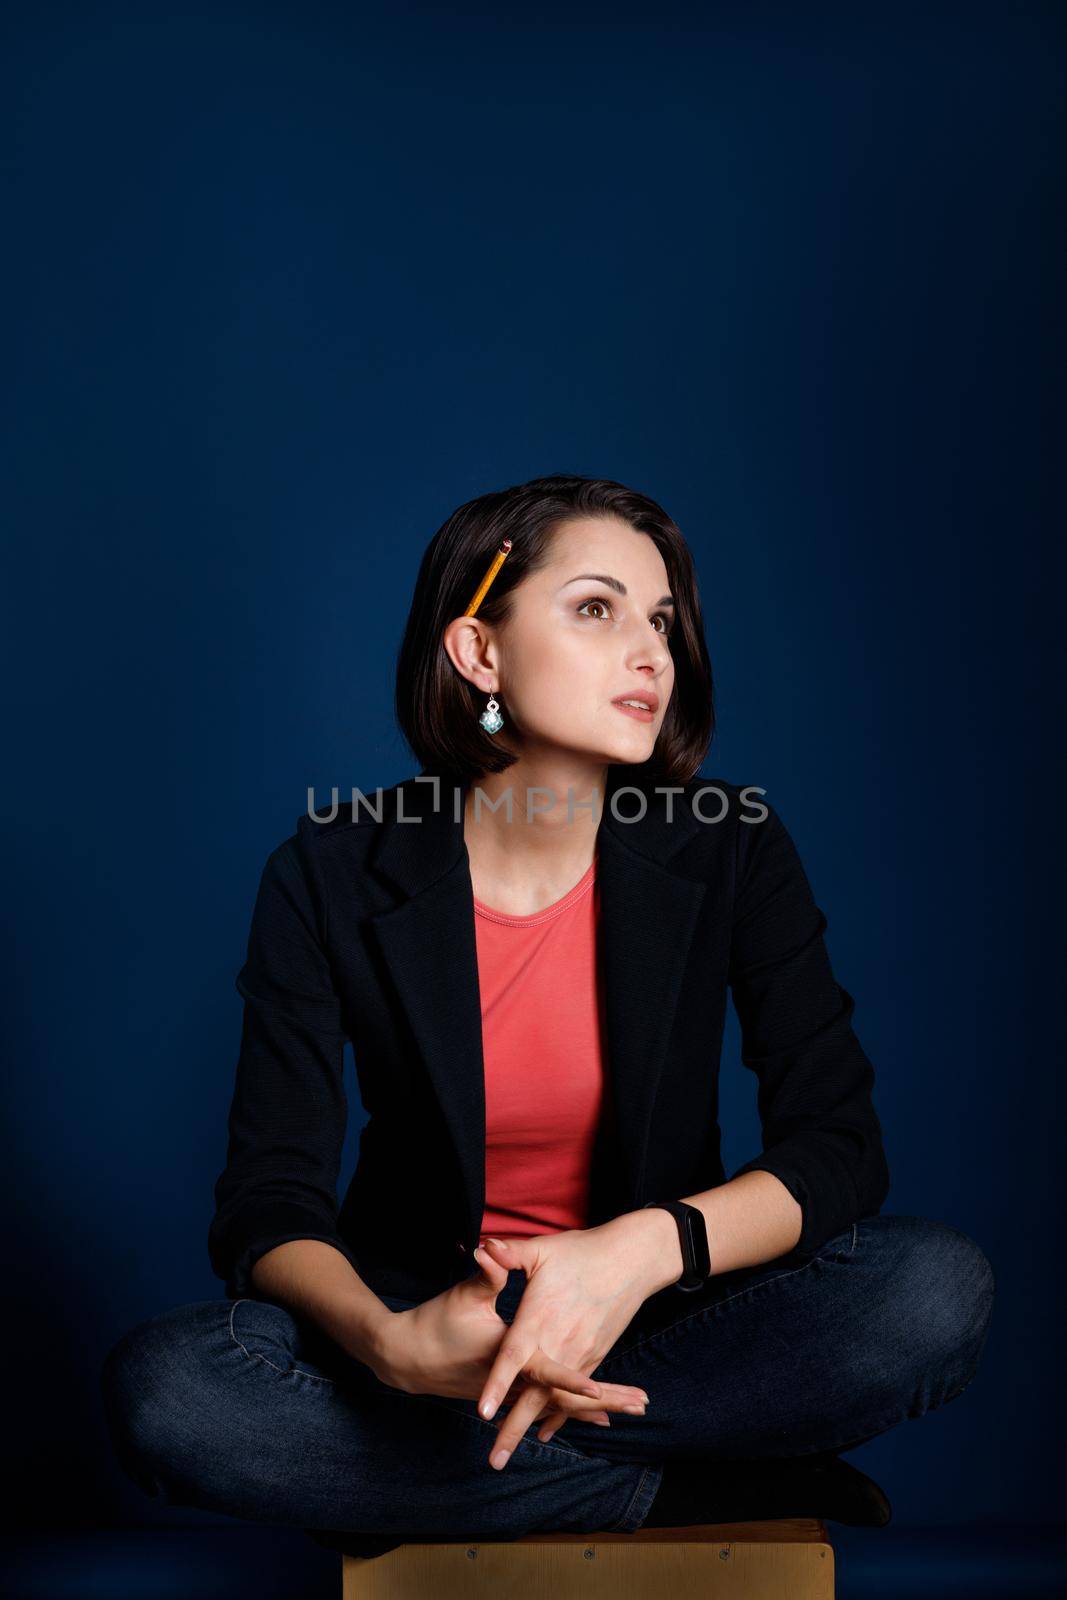 Vertical portrait of a young woman blogger or copywriter with a pencil behind her ear ponders new ideas on blue background.